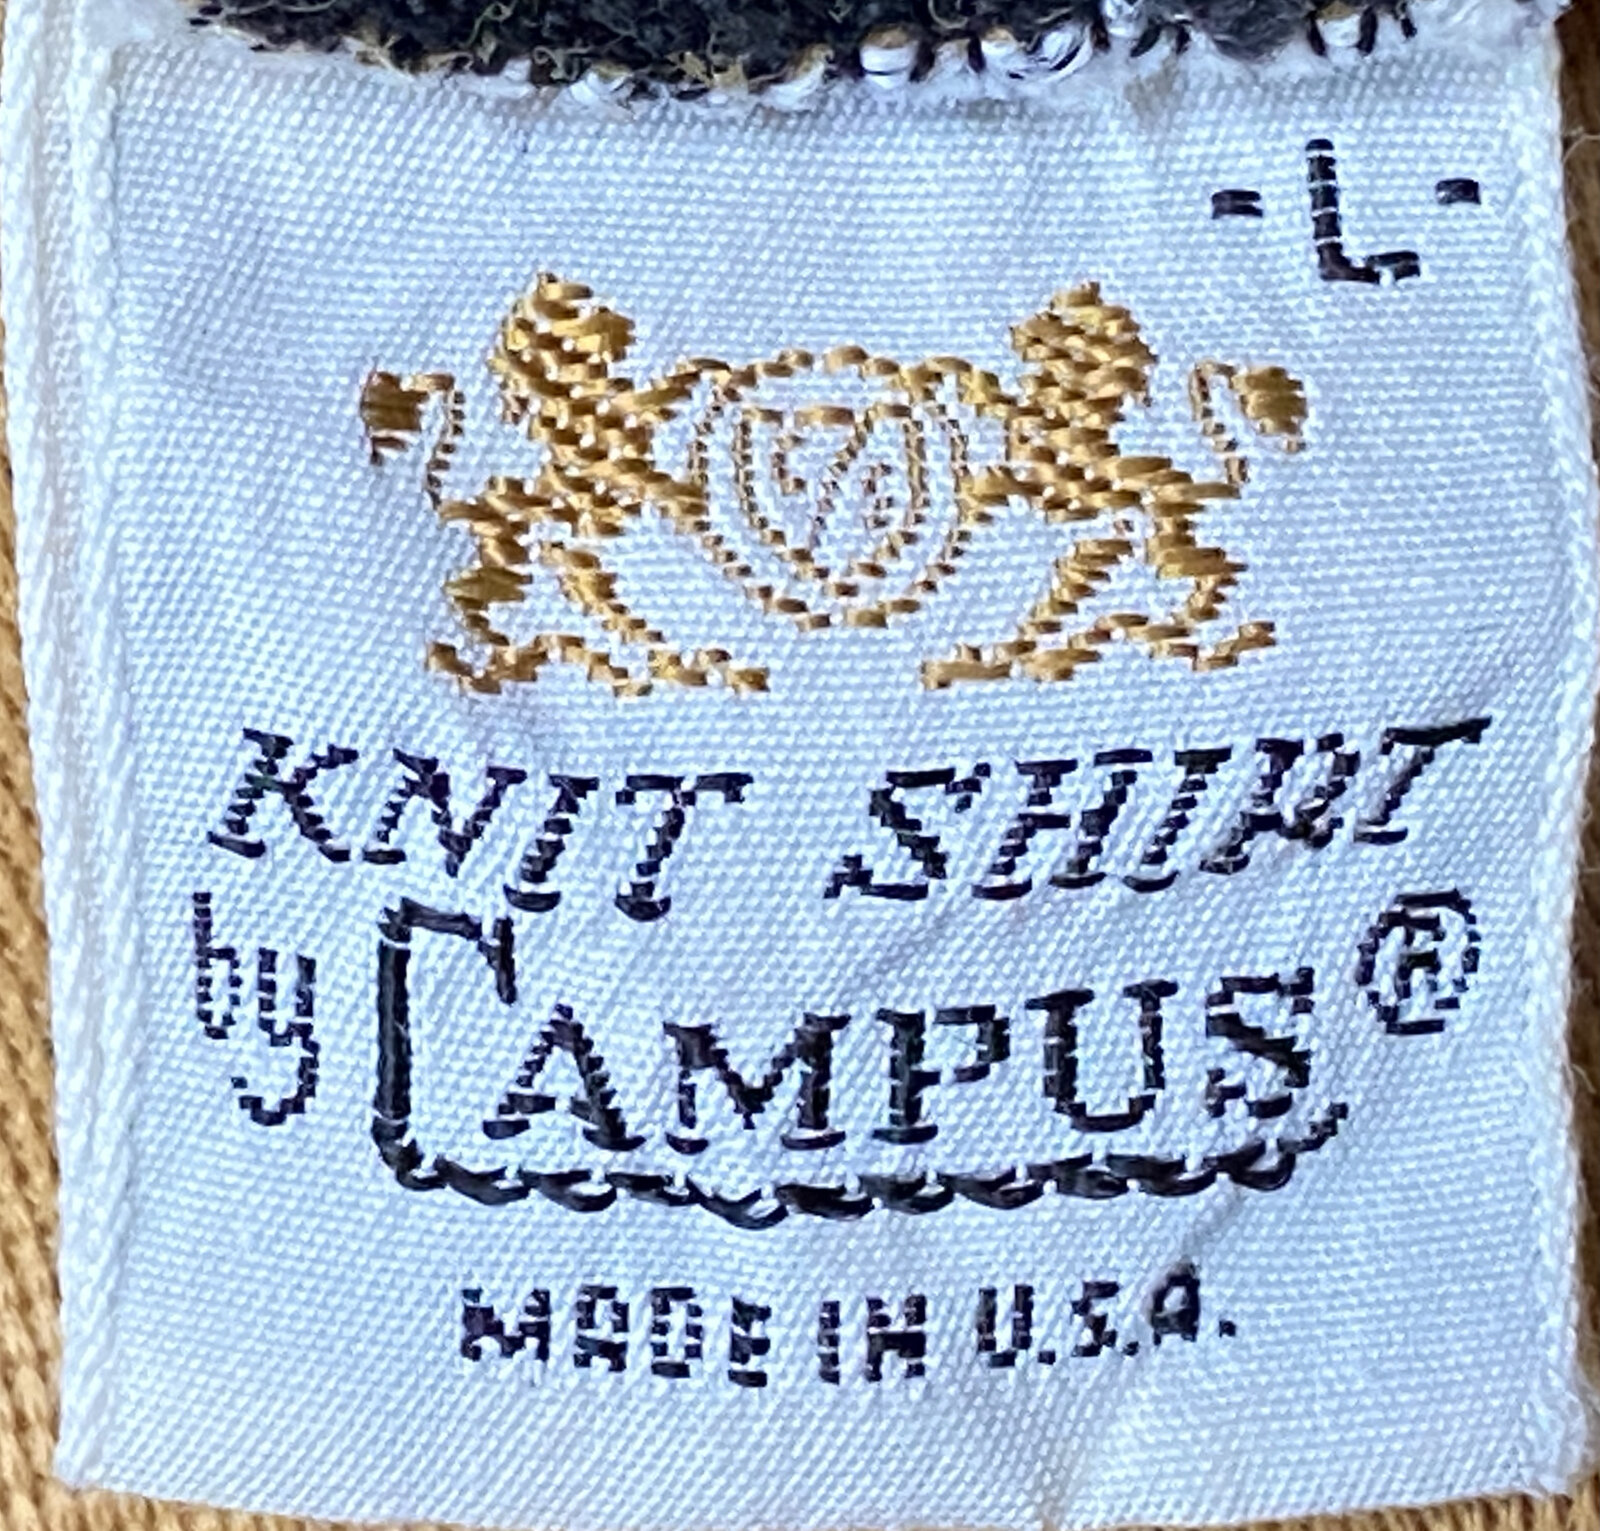 from a 1960s pullover shirt - Courtesy of Ranch Queen Vintage